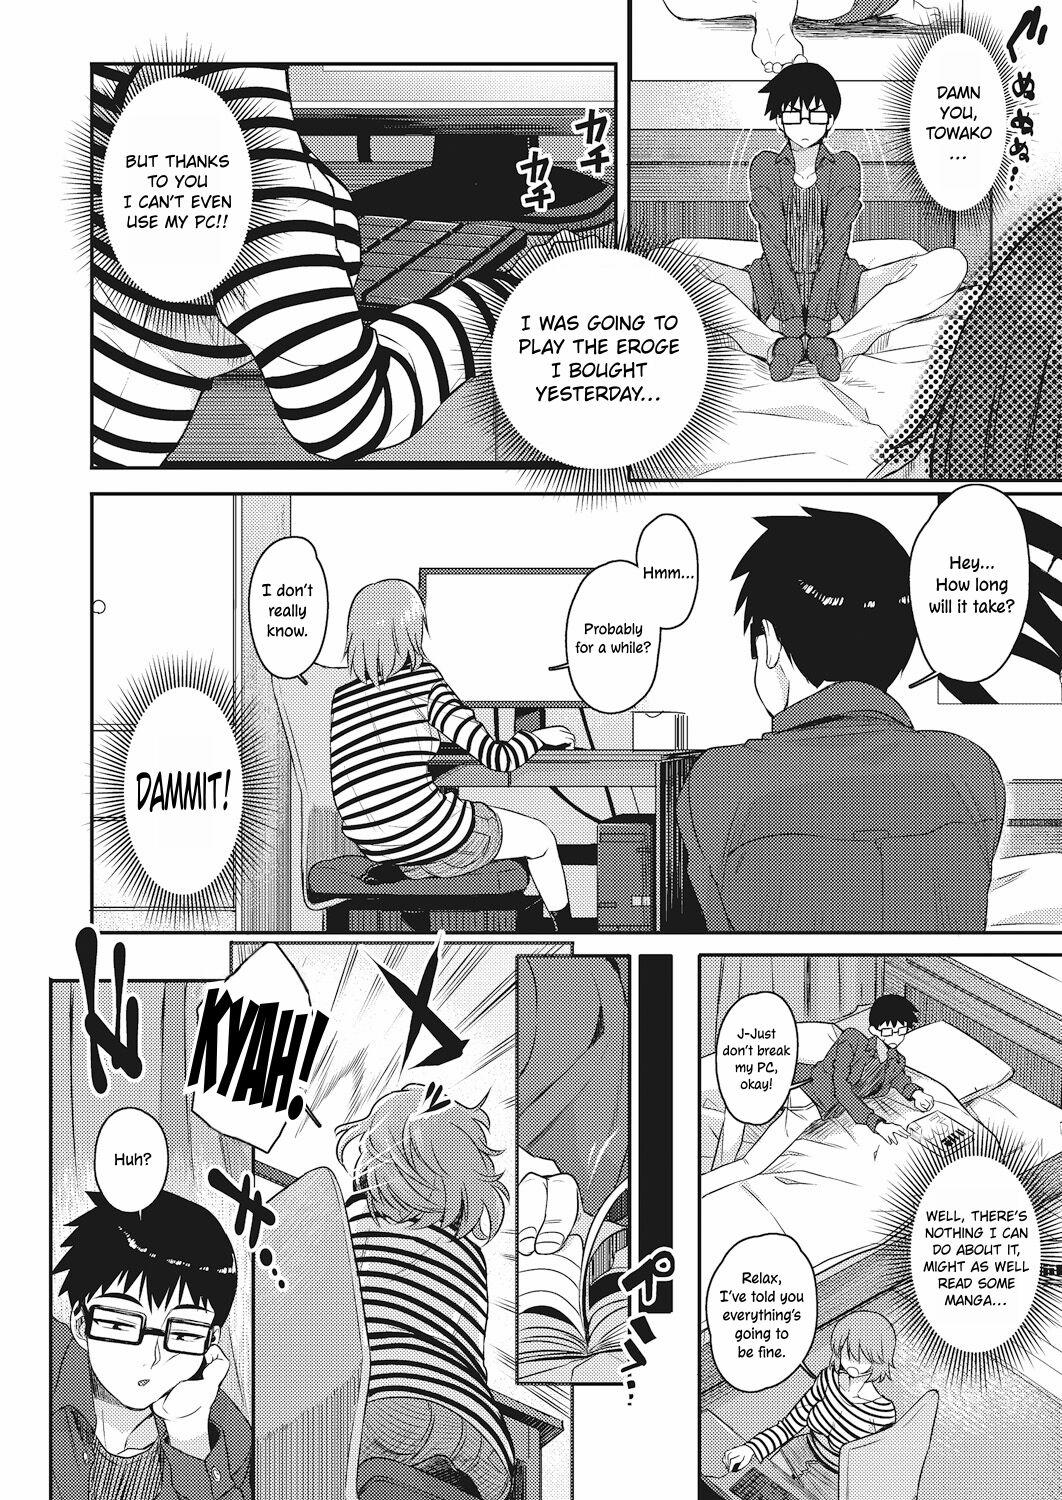 Calcinha Monitor no Mukougawa | The Other Side of the Monitor Hentai - Page 2